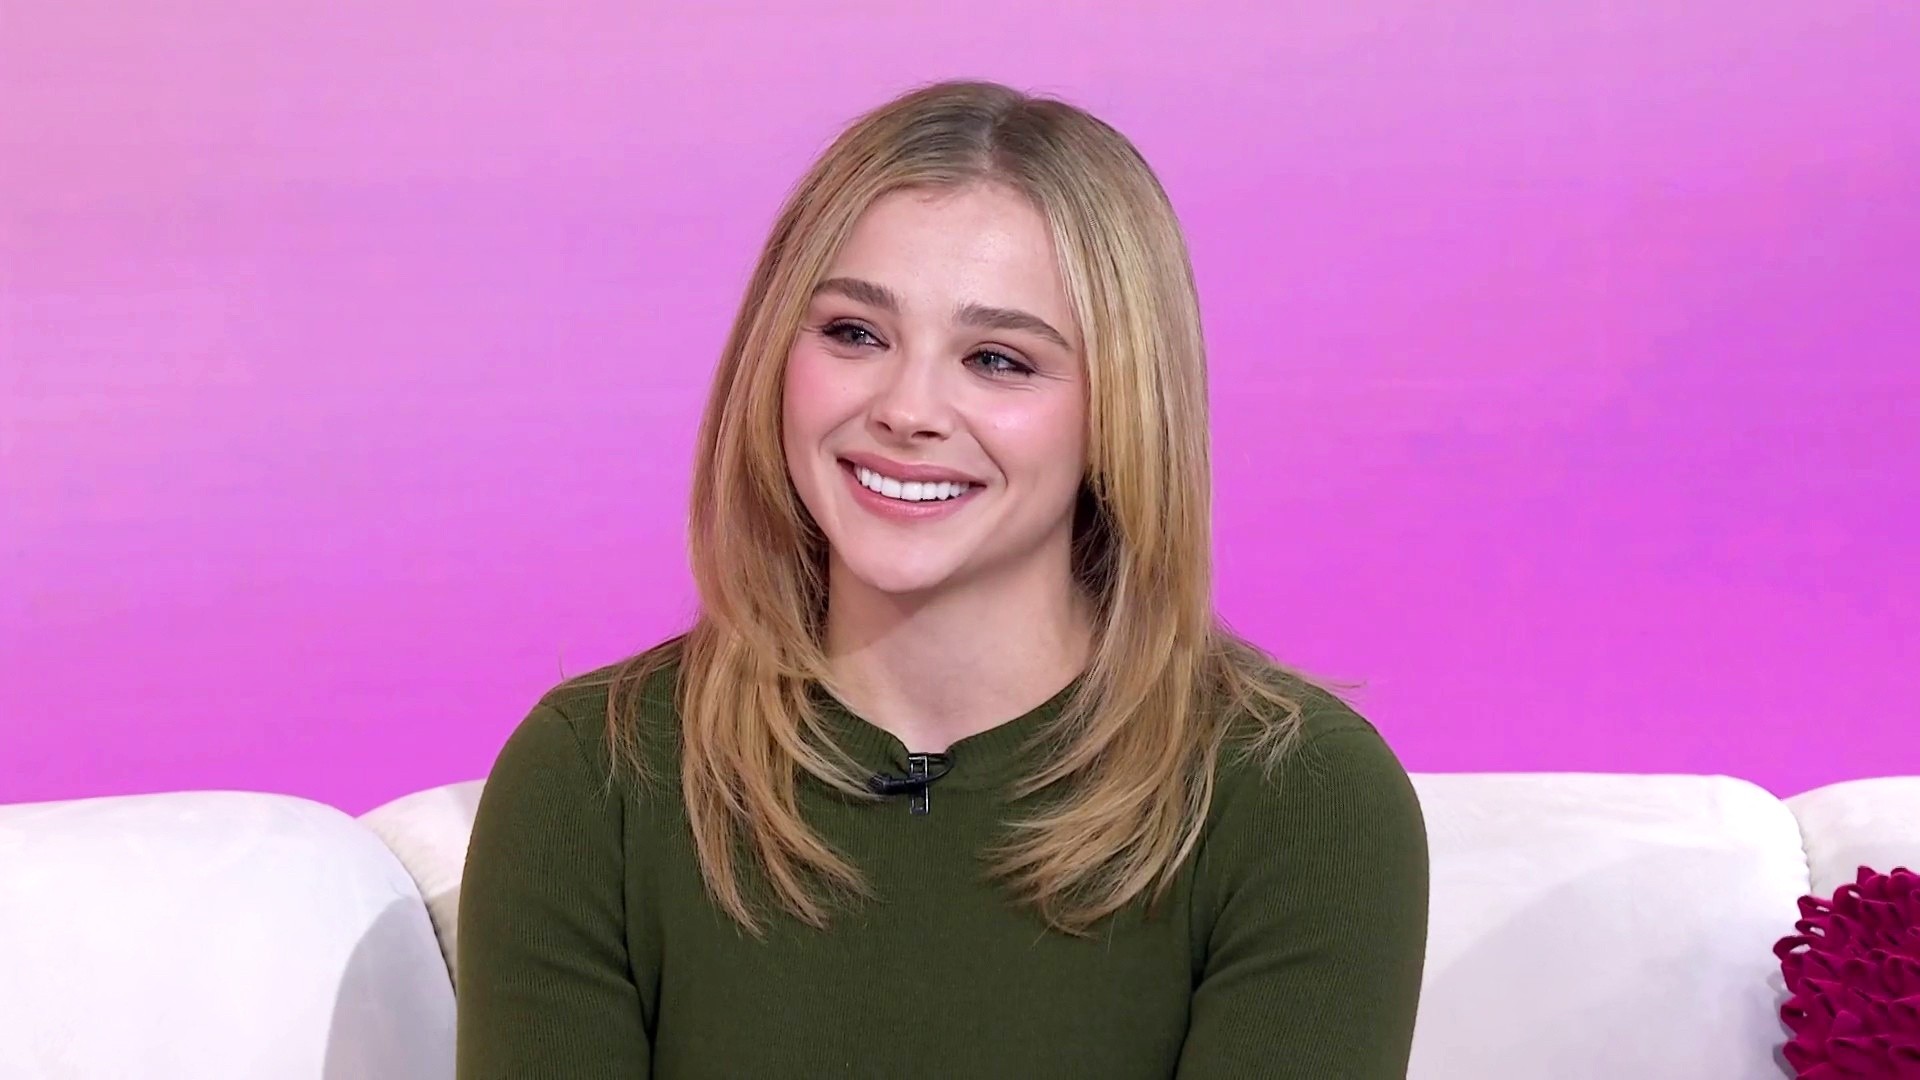 Chloe Grace Moretz At The Today Show - NYC  Imagelinkglobal ILG: Product:  ILEA001460459｜Photos & Images & Videos｜KYODO NEWS IMAGES INC